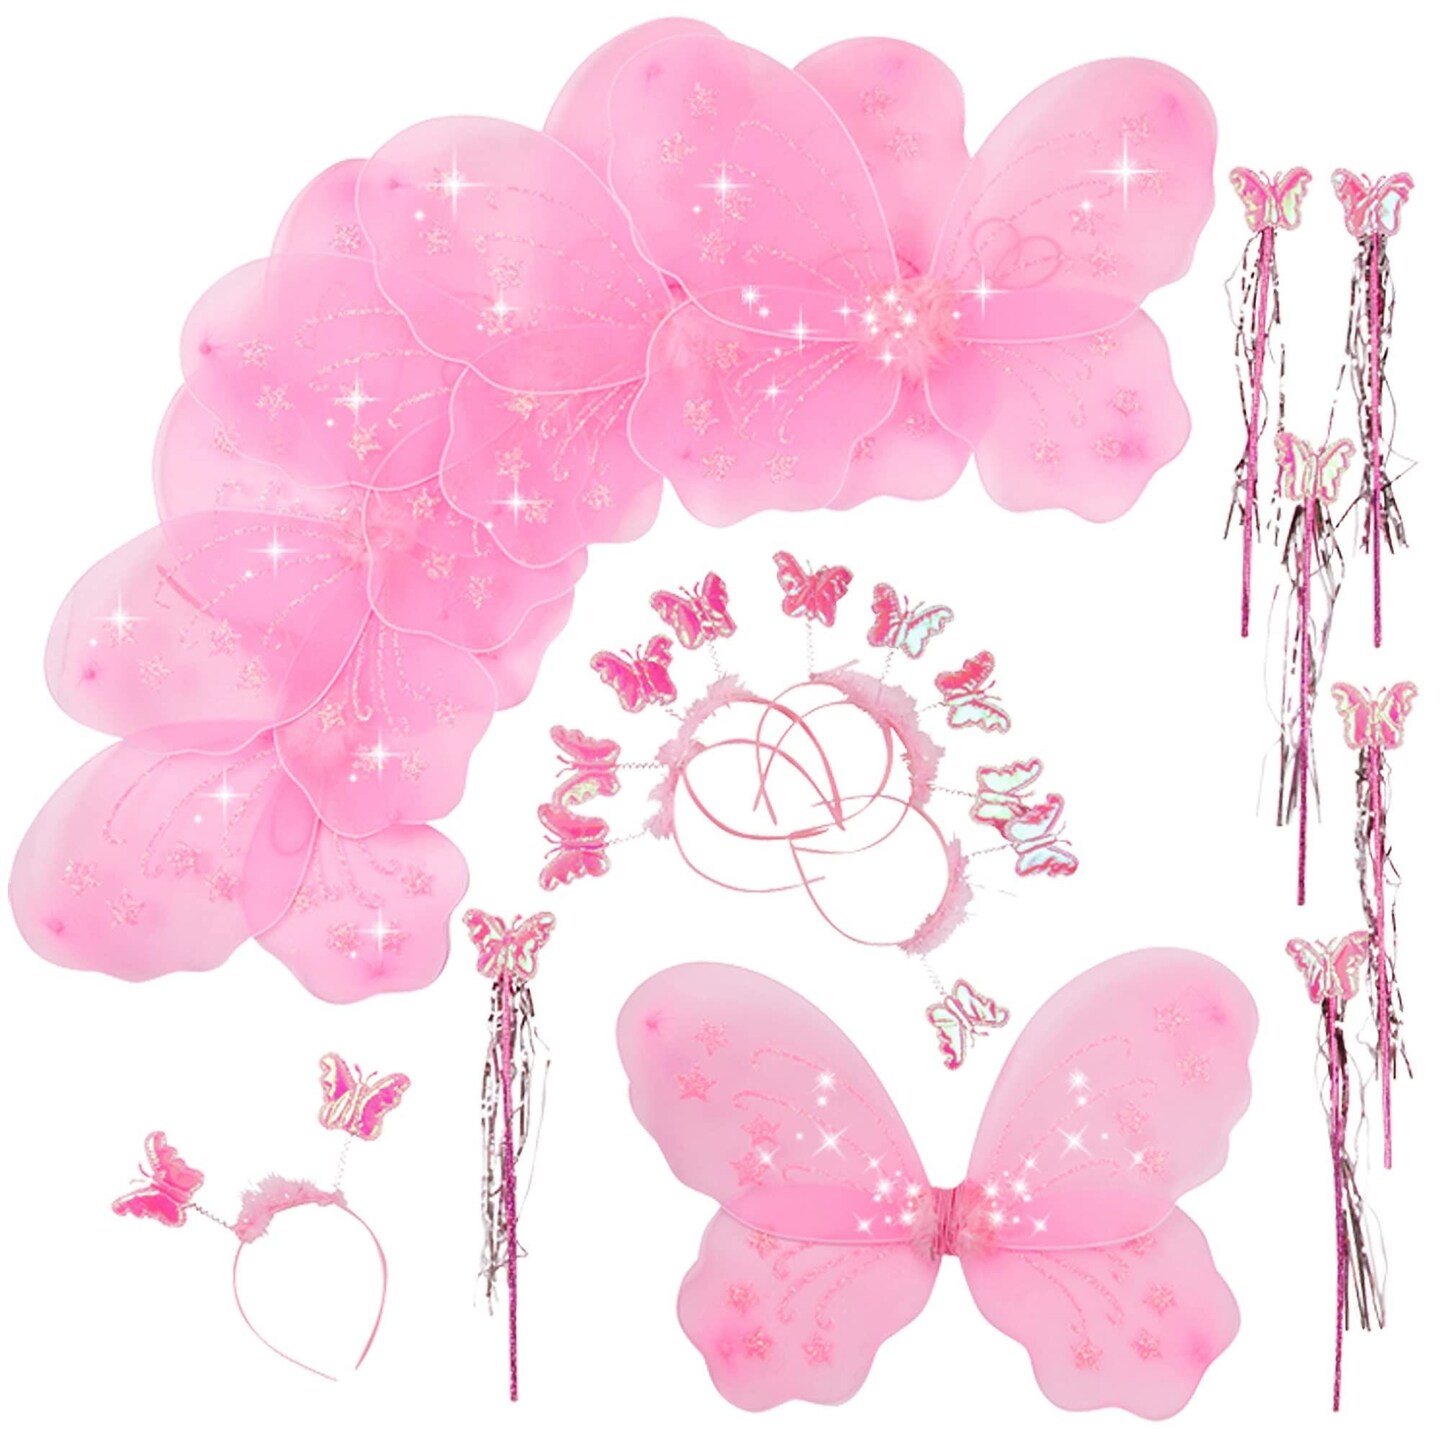 Butterfly Craze Girls&#x27; Fairy Wings with Wands and Headbands - Pack of 6, Costumes and Dress Up Set For Kids Aged 3 and Up, These Accessories are Perfect as Birthday Party Favors or Supplies, (Pink)